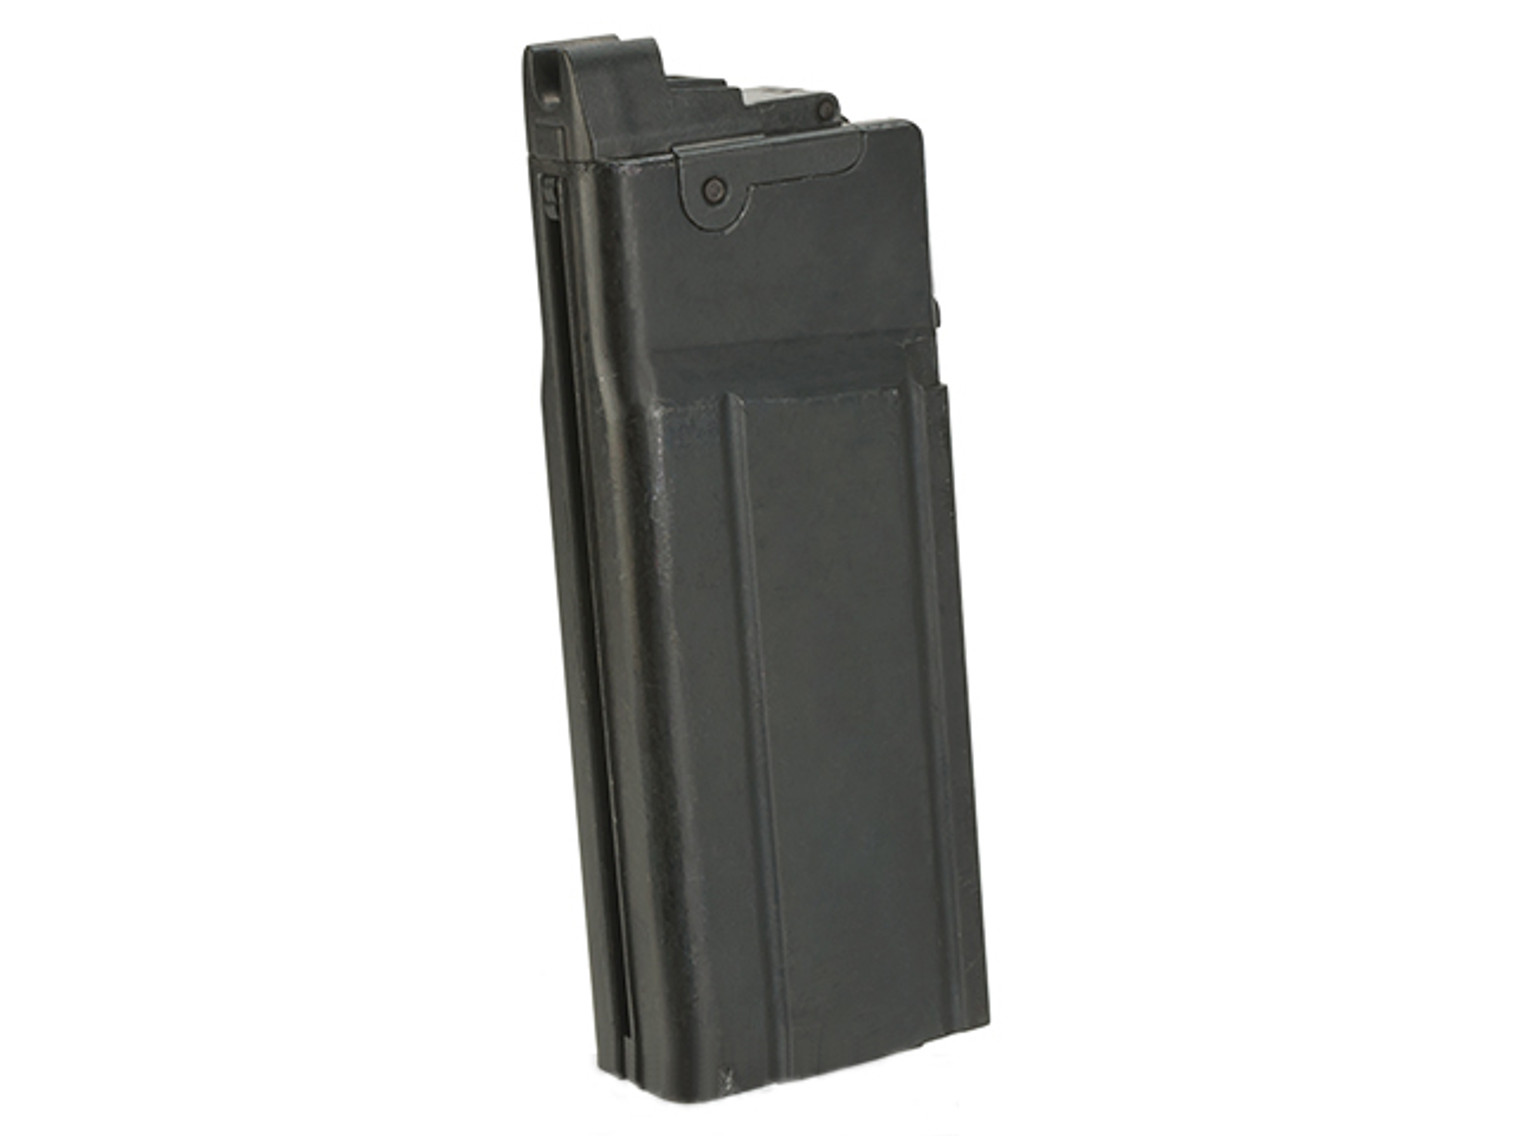 King Arms 15 Round CO2 Magazine for M1A1 Series Gas Blowback Rifles